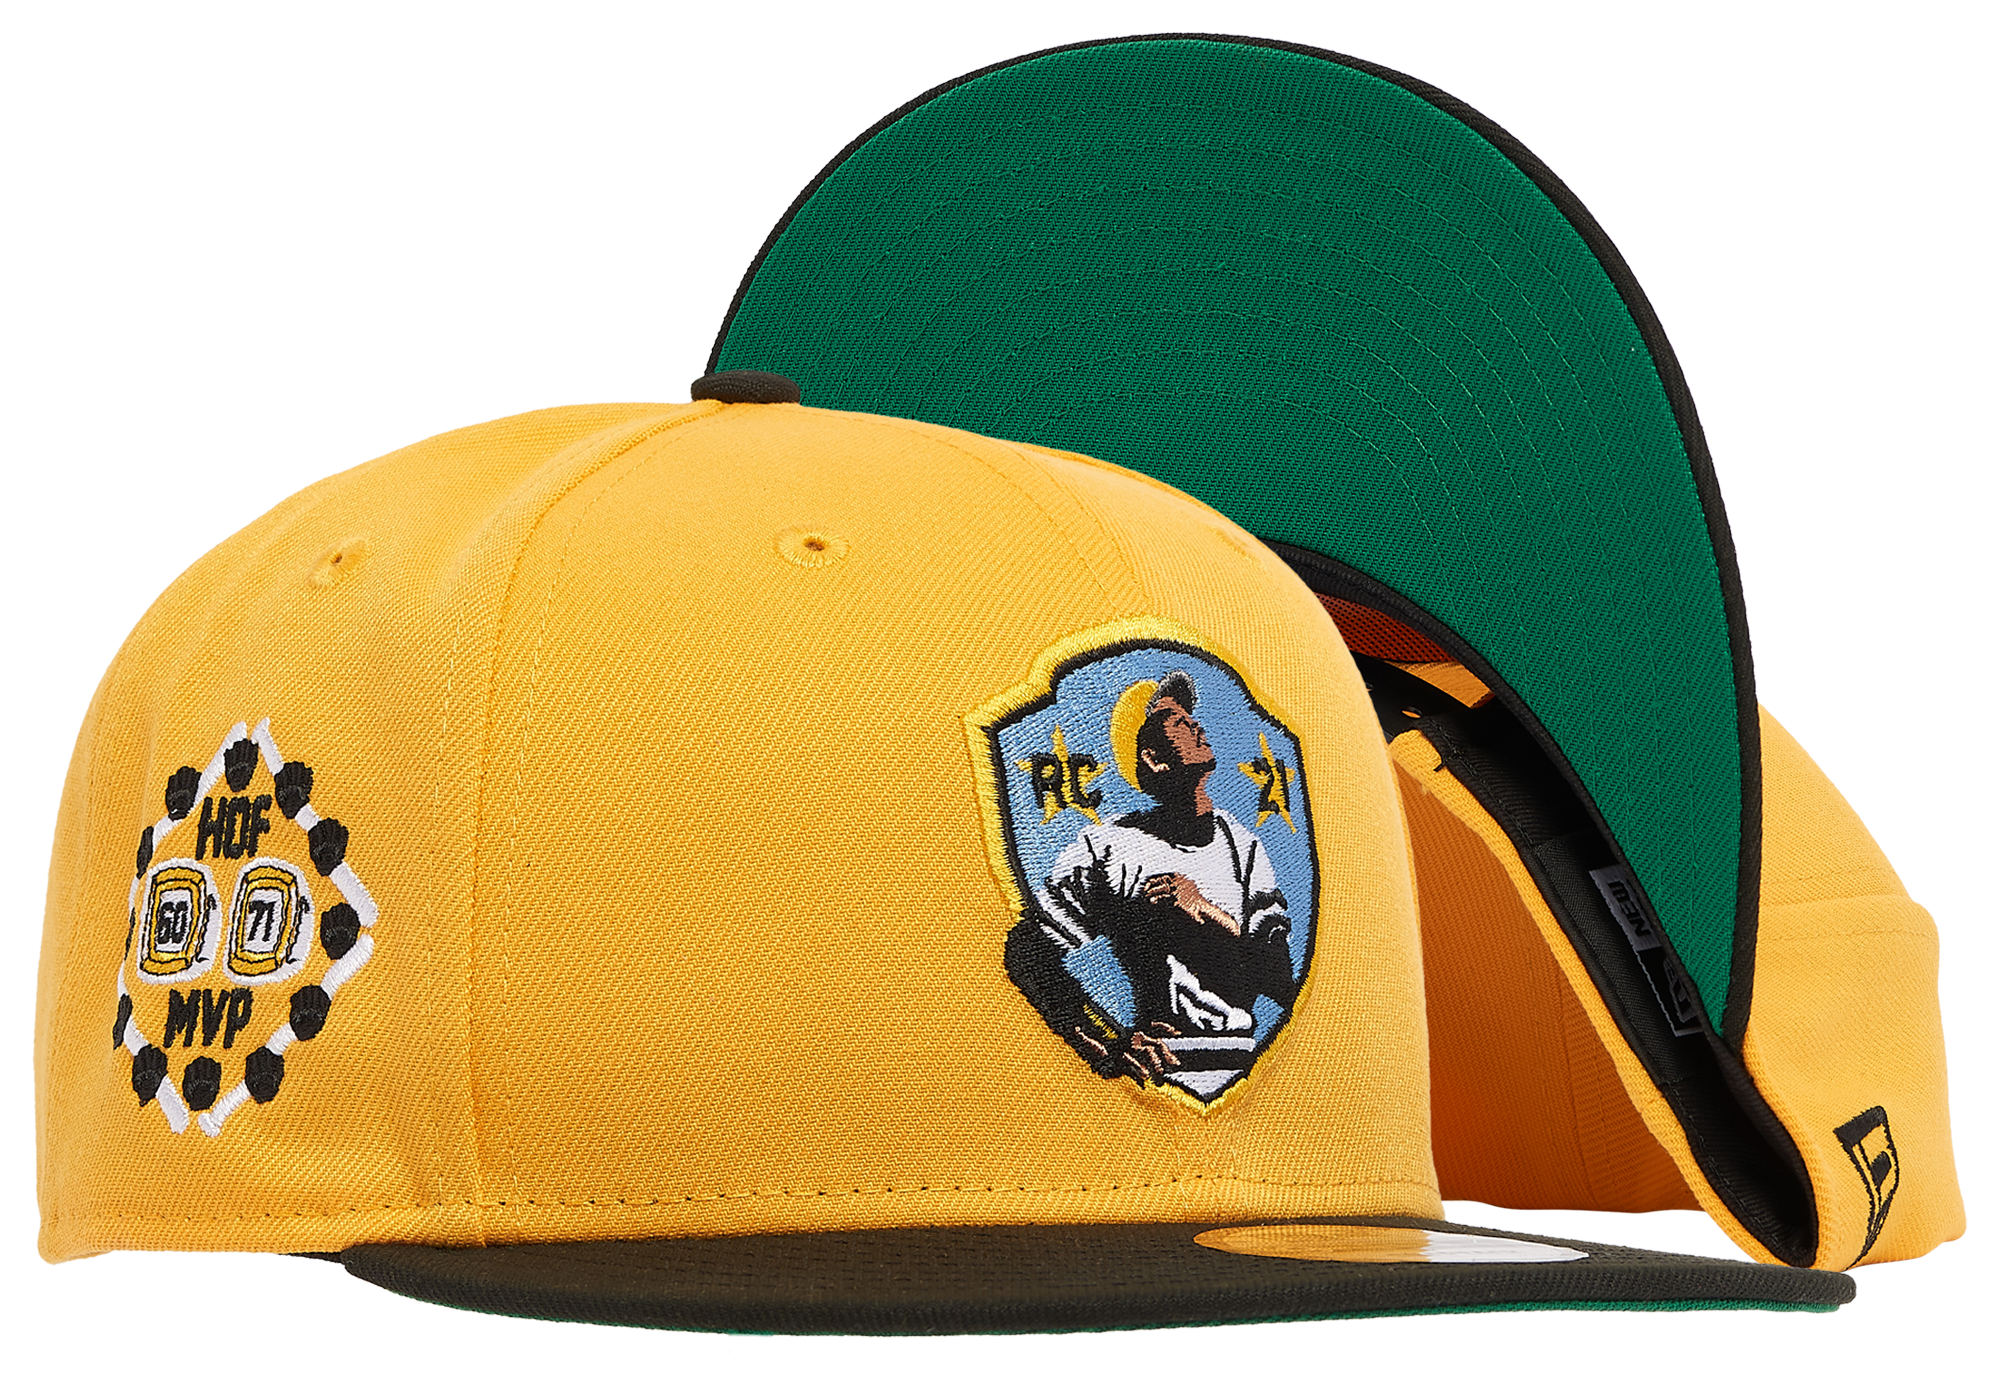 New Era Roberto Clemente 21 2T Hall of Fame Snap Cap